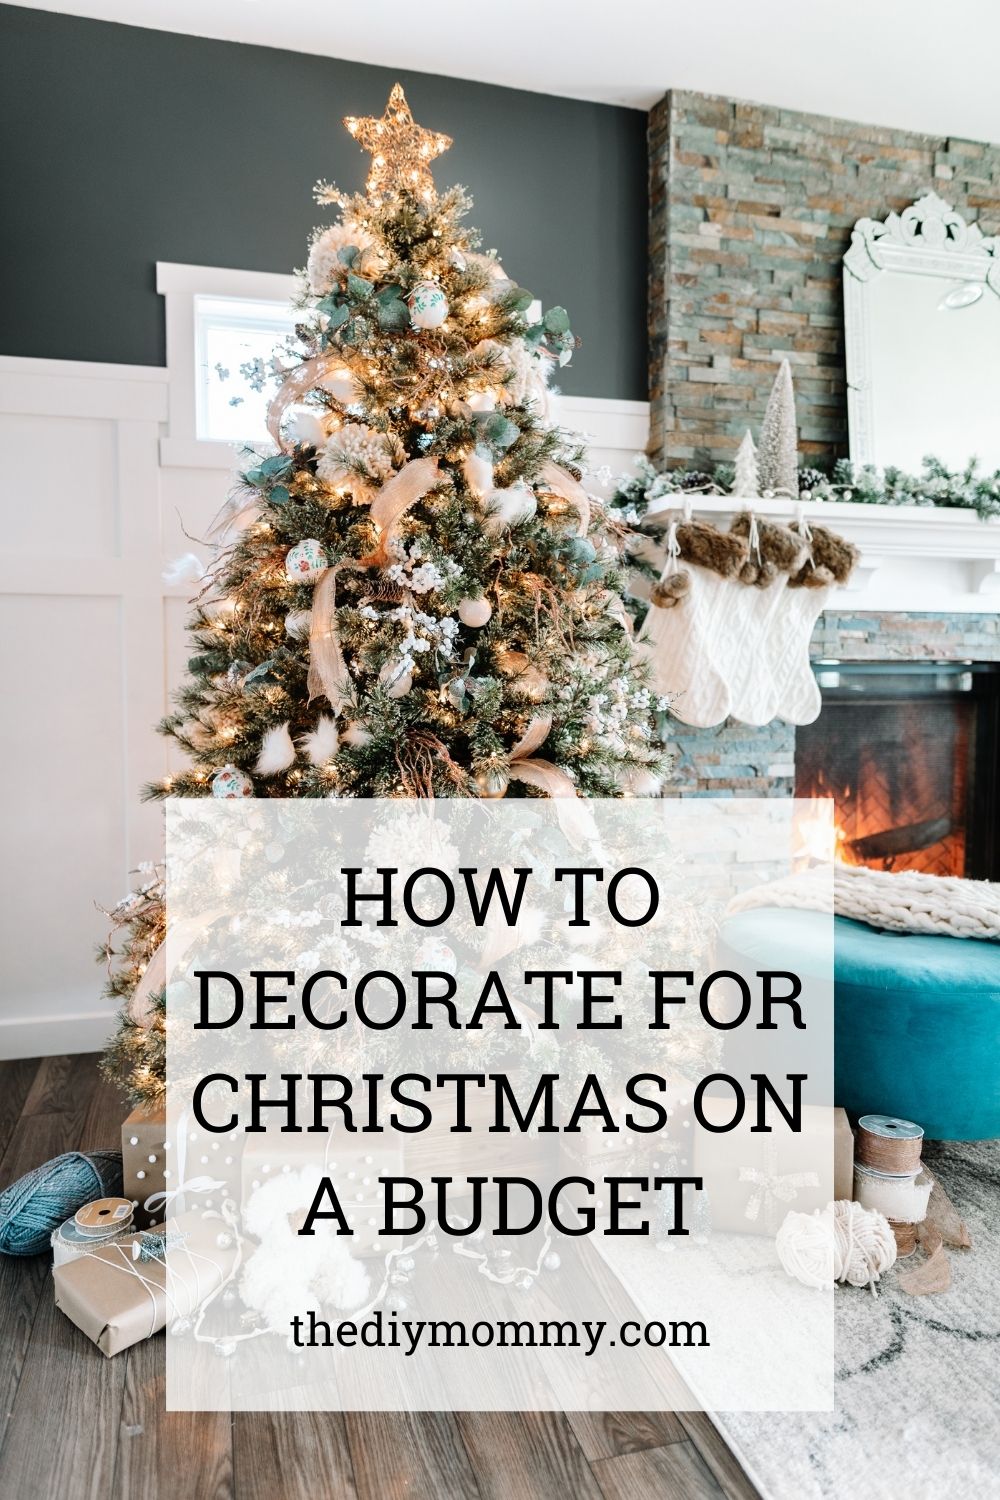 Christmas Decorating Ideas: Reuse these timeless items year after year!